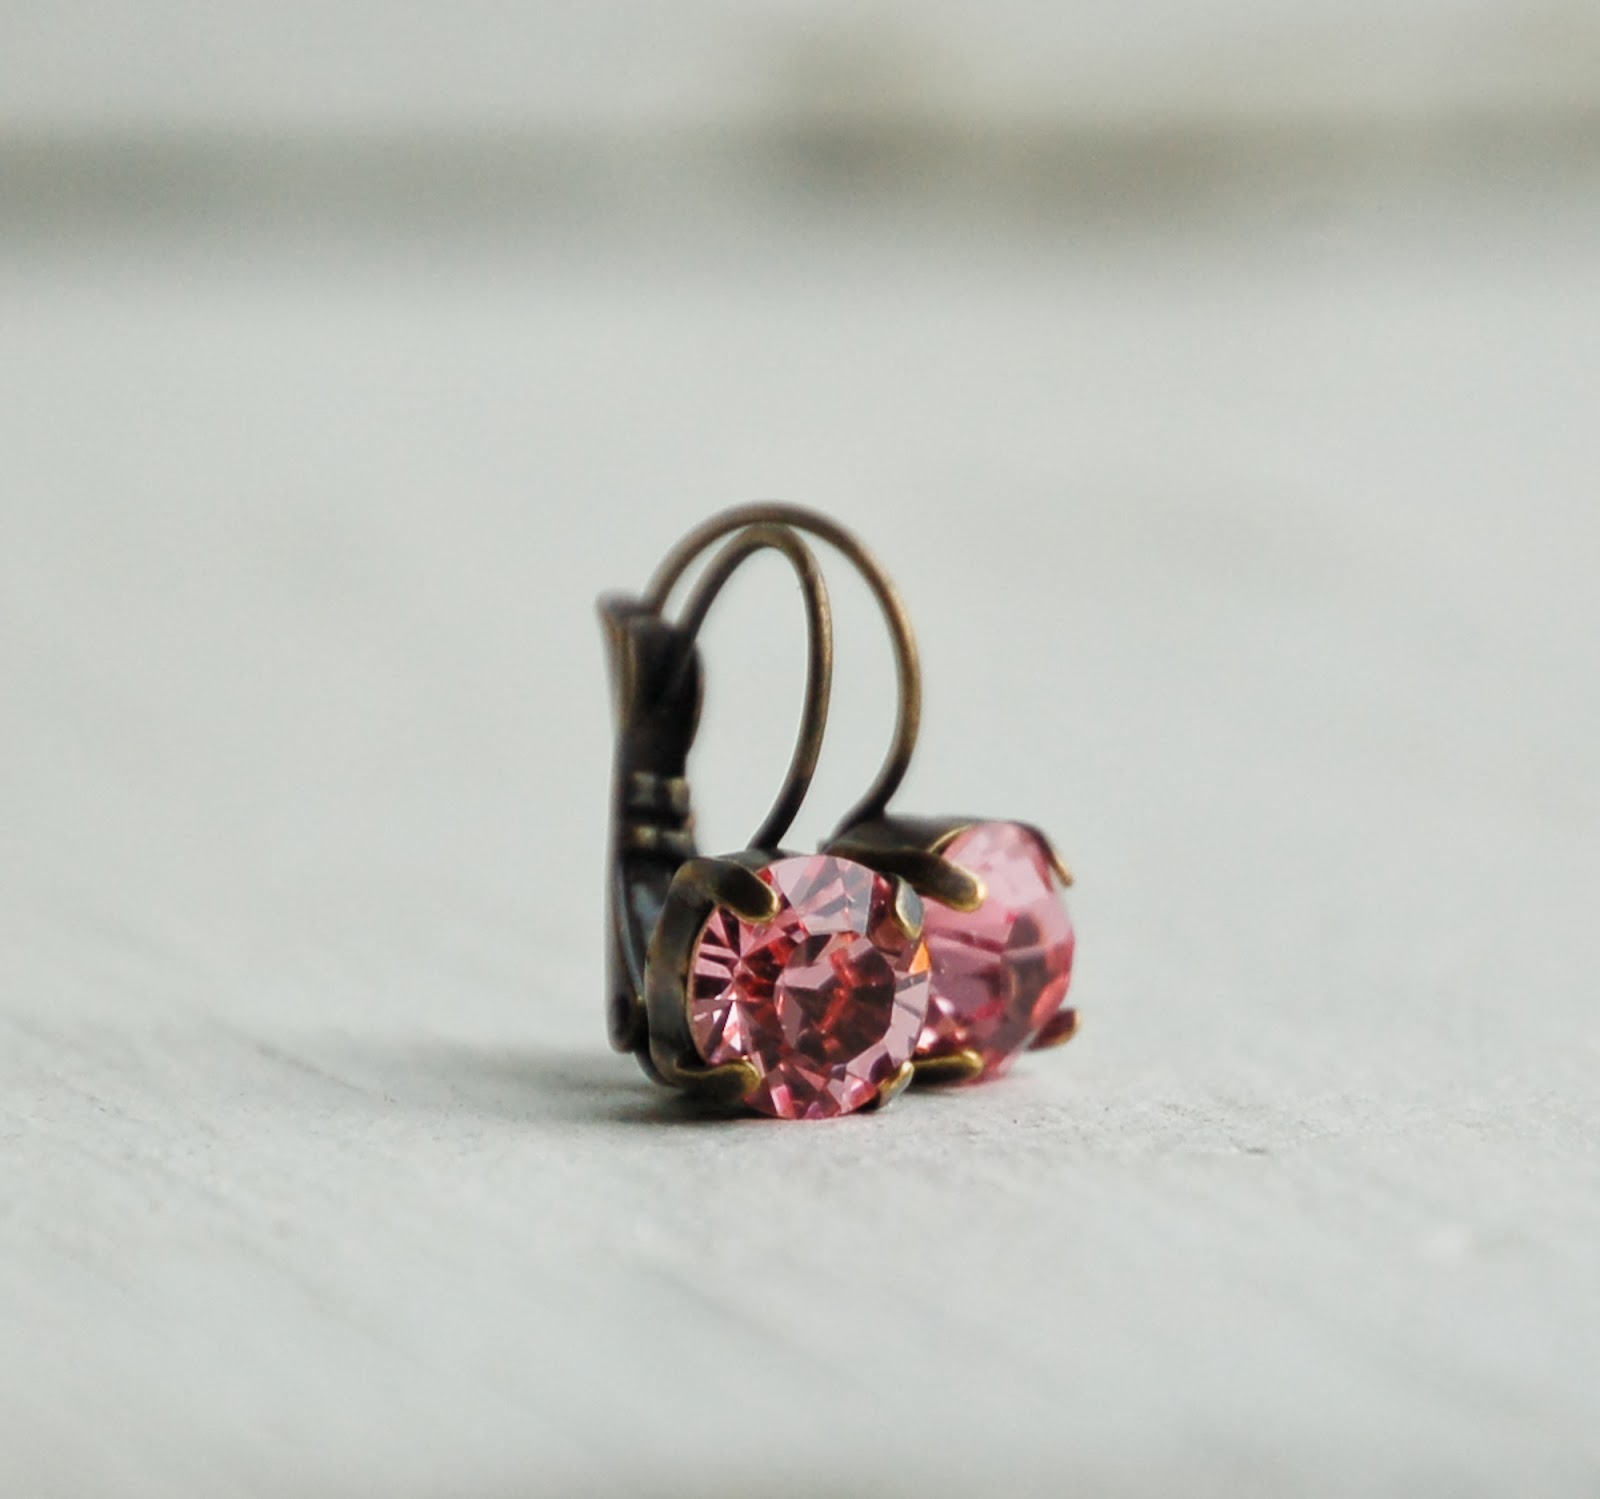 https://www.etsy.com/listing/166579749/pink-crystal-rhinestones-earrings-rose?ref=shop_home_active_3&ga_search_query=lever%2Bback%2Brhinestone